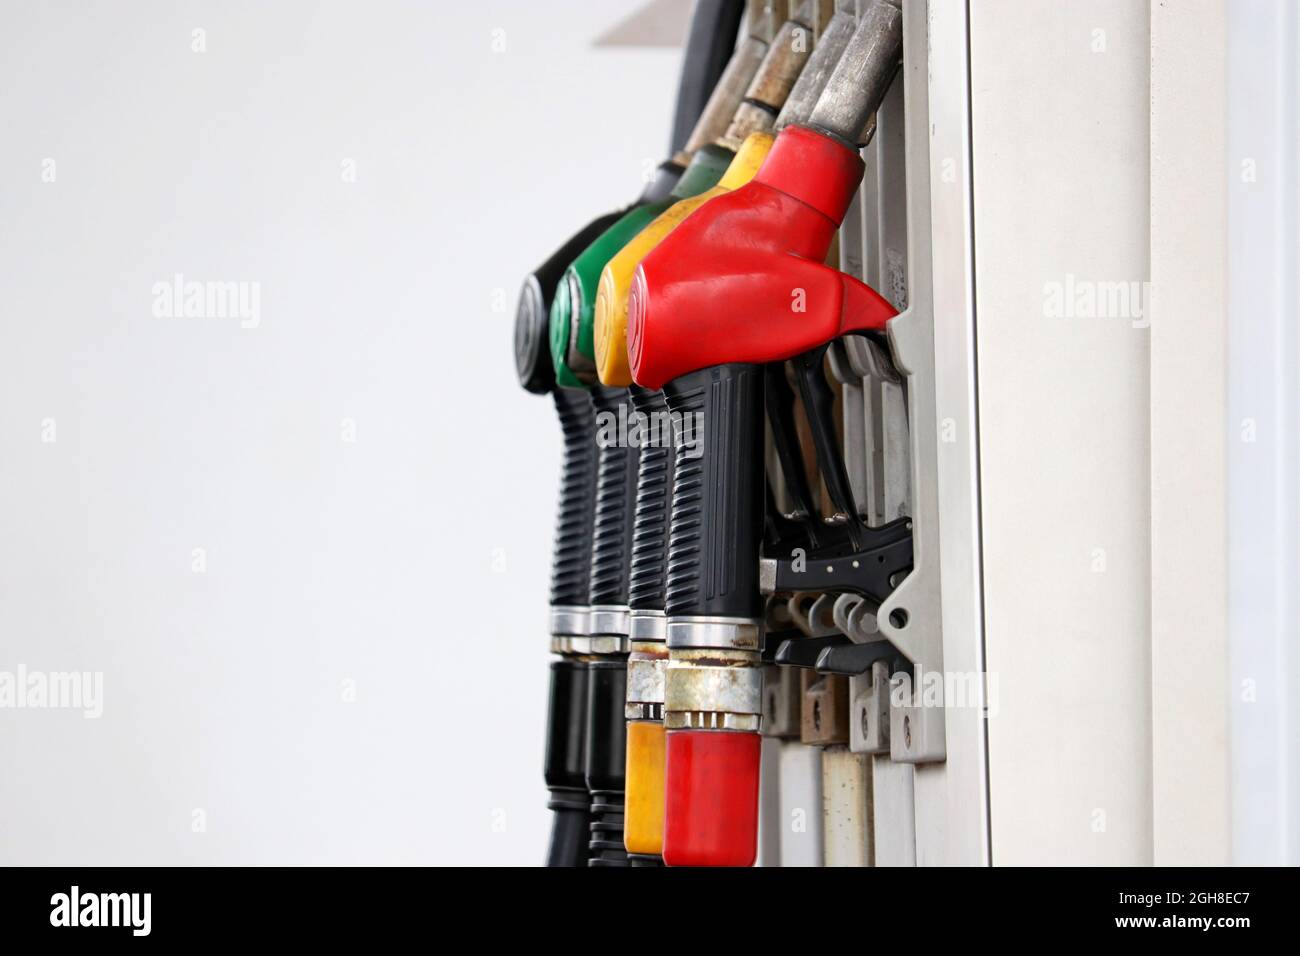 Petrol hoses on filling station in a row. Gas station service Stock Photo